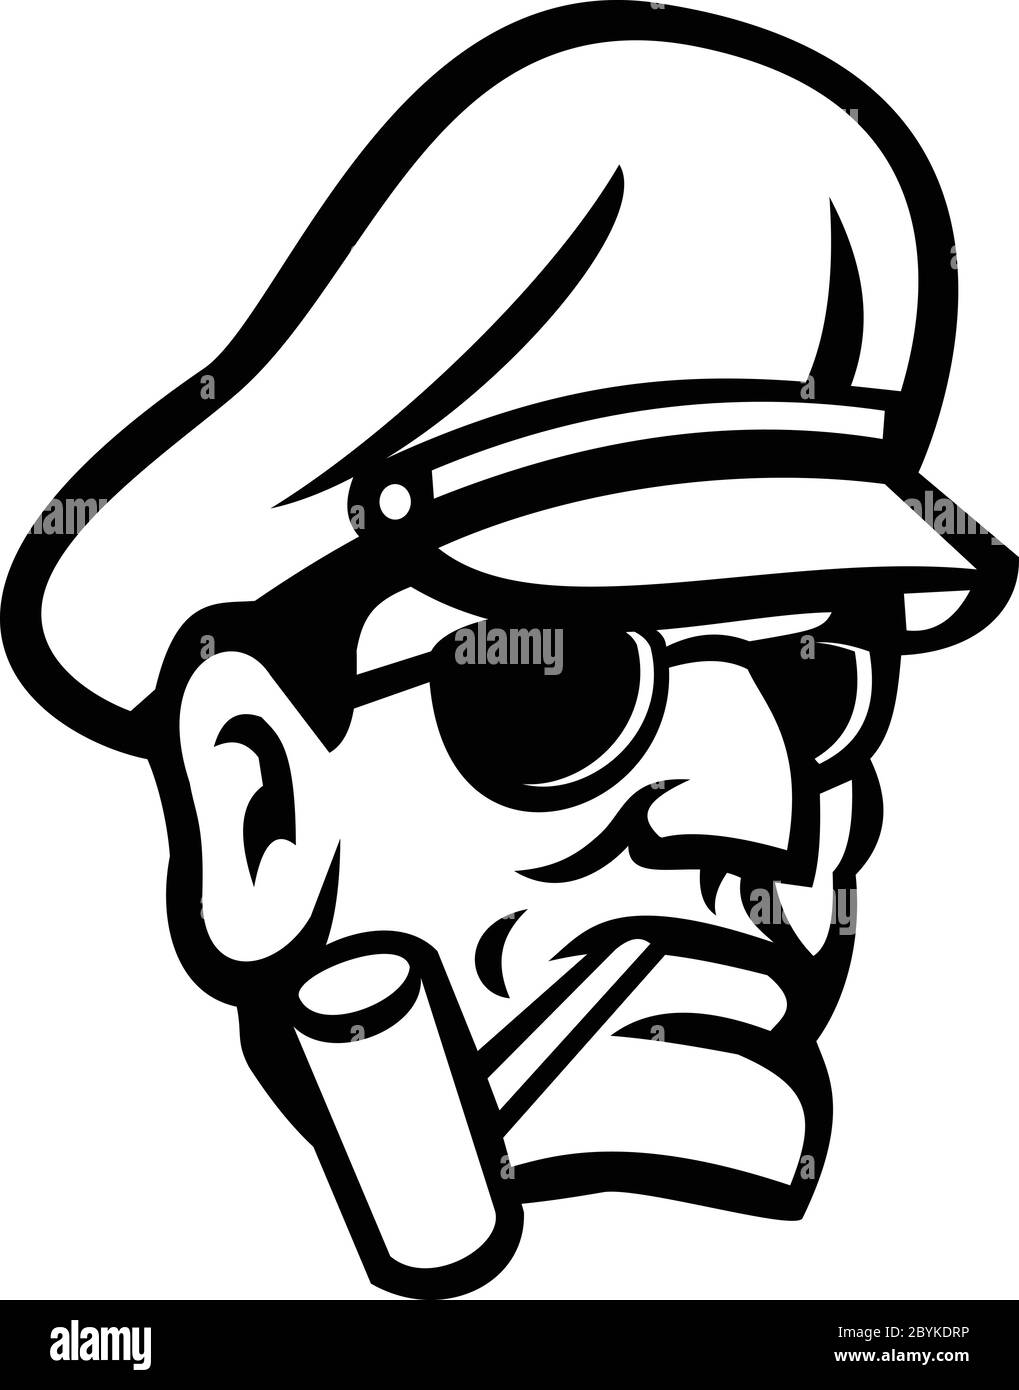 Mascot icon illustration of bust of a military army general smoking a pipe viewed from front on isolated background in retro black and white style. Stock Vector